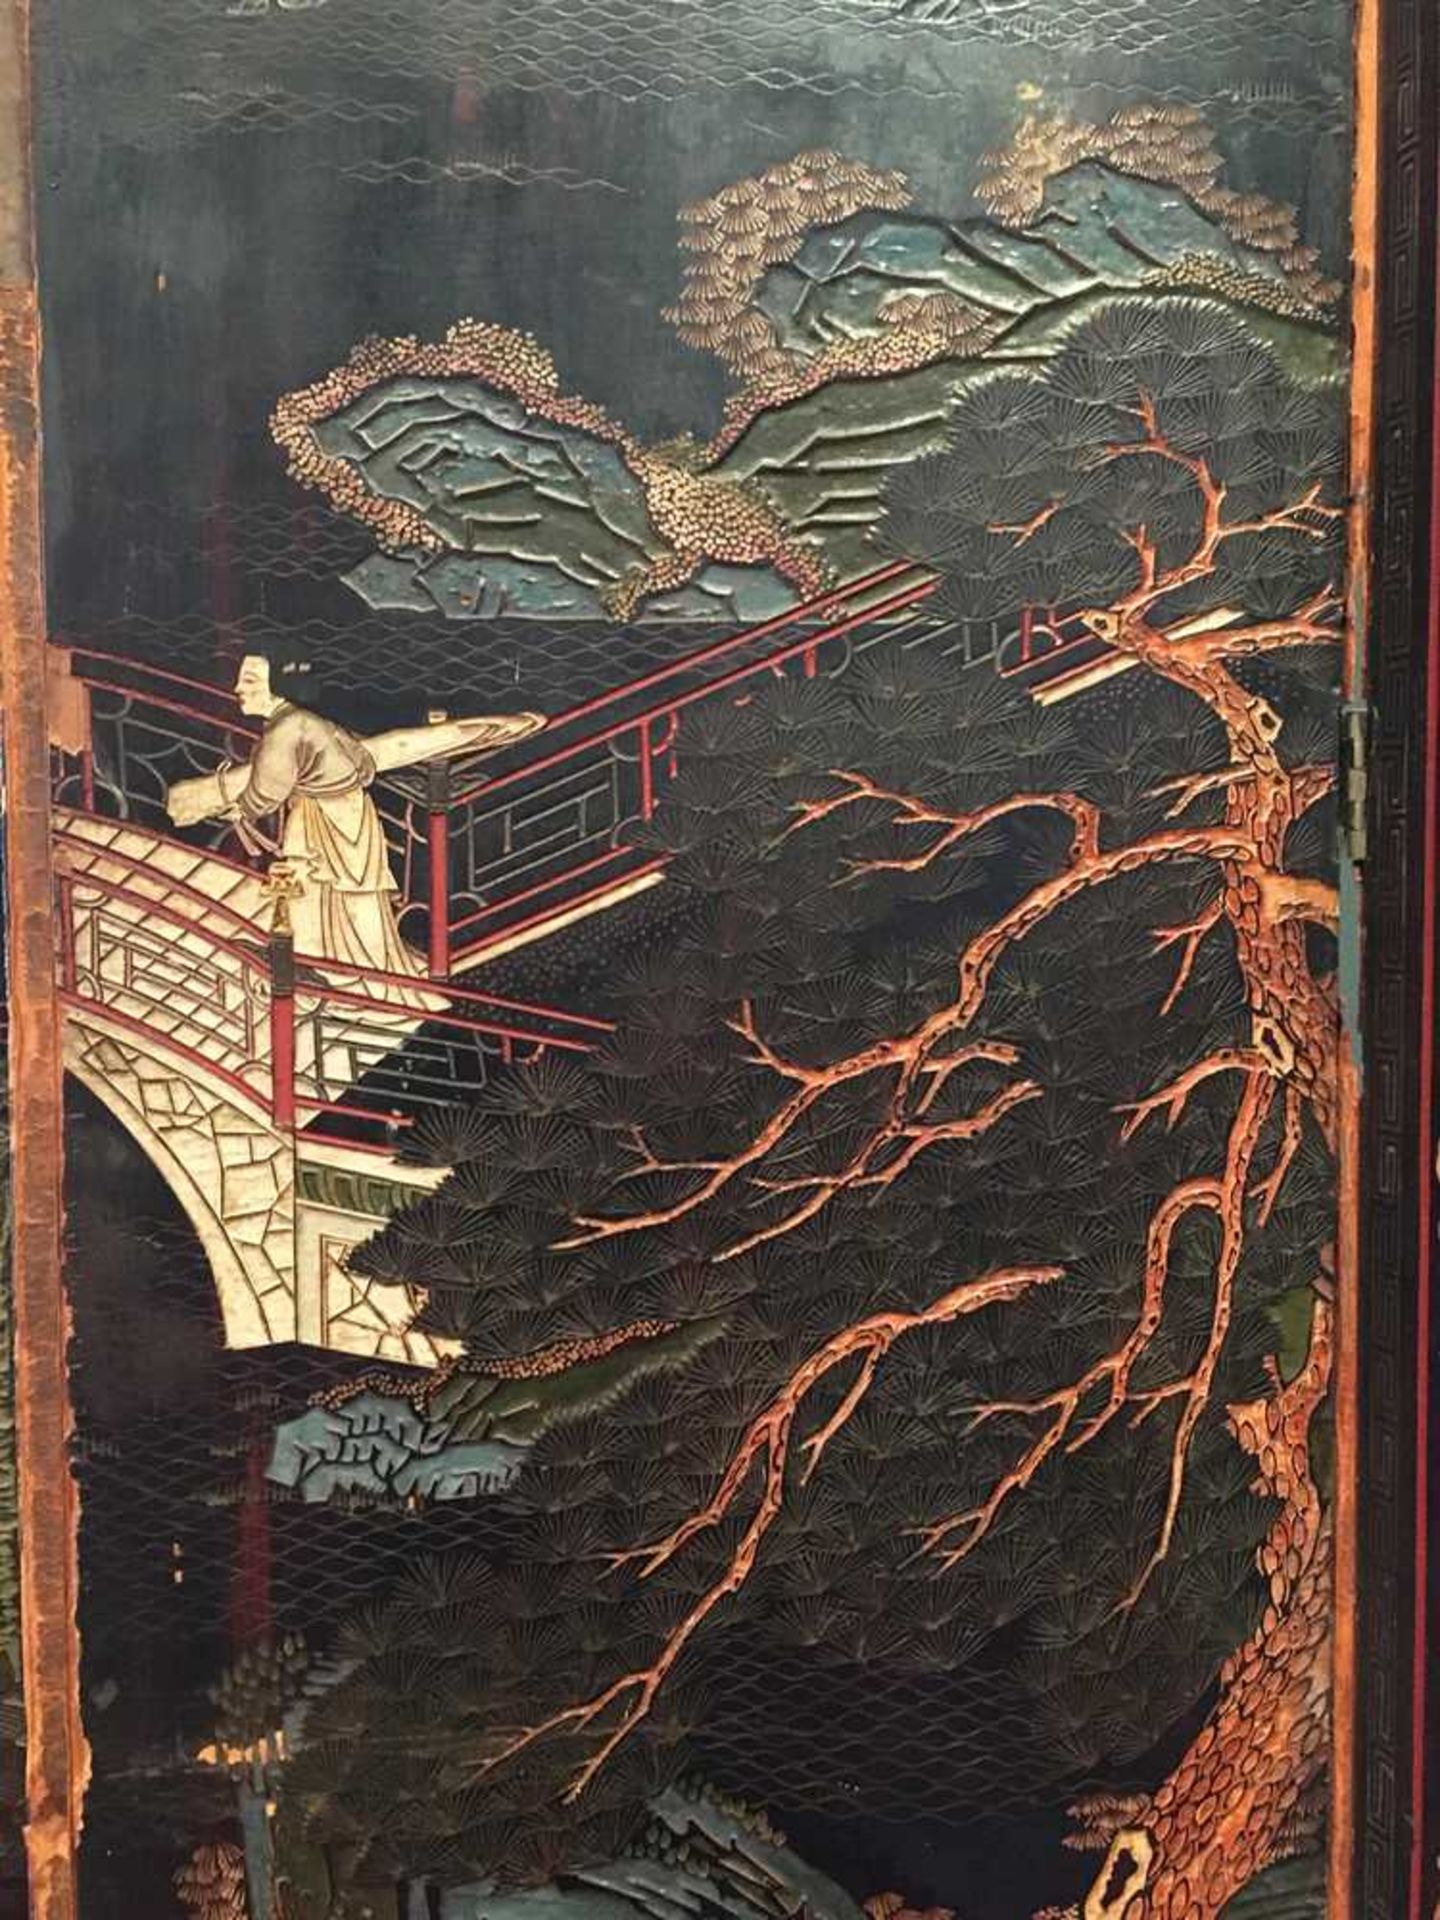 A CHINESE COROMANDEL BLACK LACQUER TWELVE-PANEL SCREEN QING DYNASTY, 18TH CENTURY - Image 46 of 72